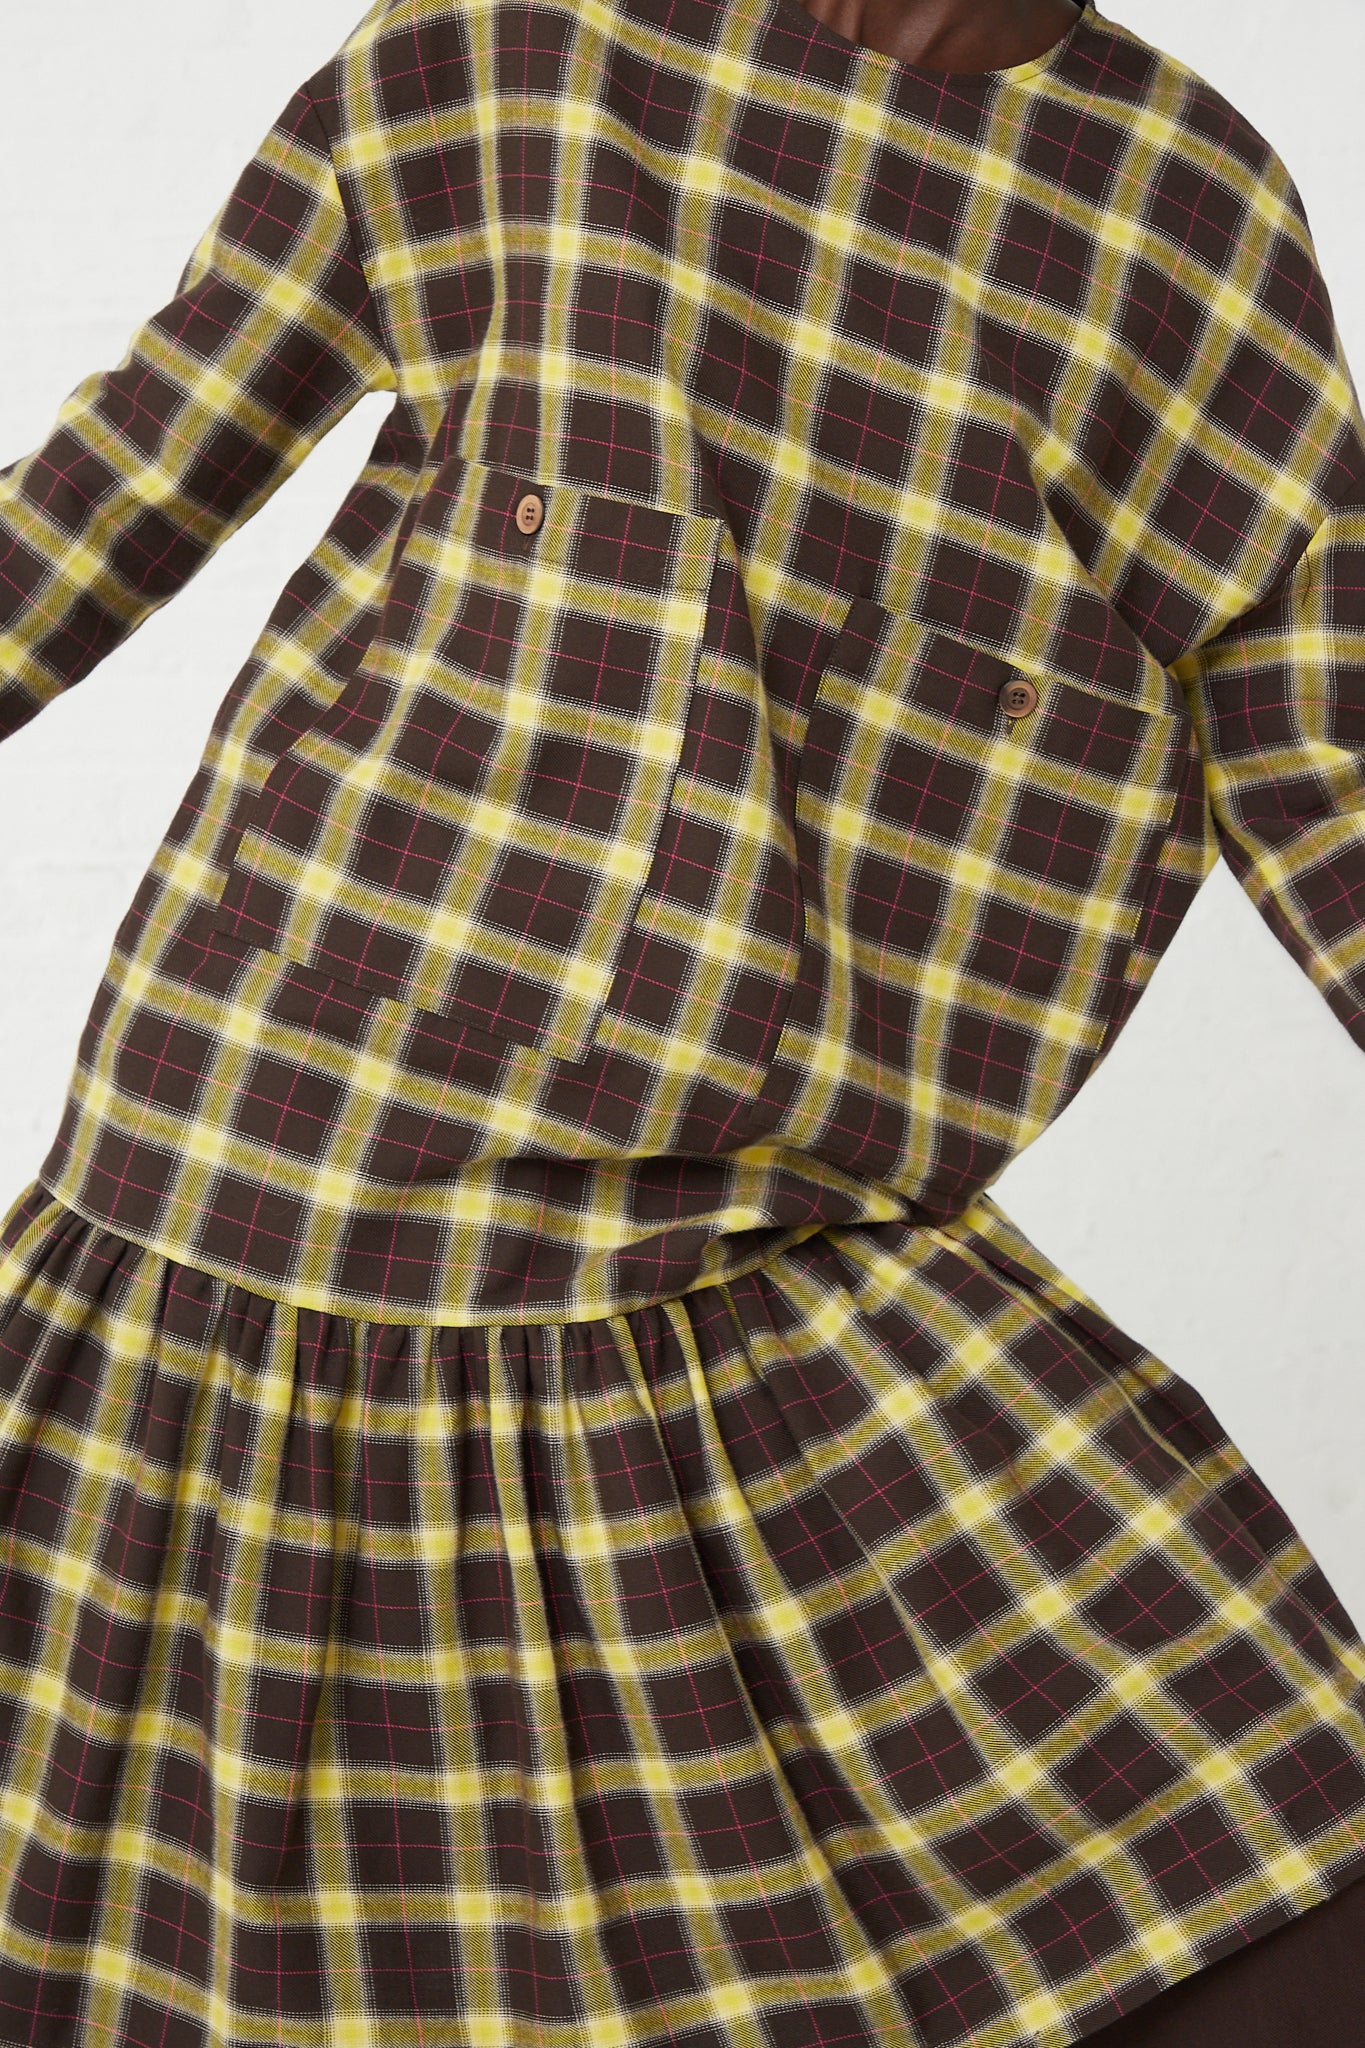 A woman wearing an AVN Fun Dress in Check Brown, Yellow and Pink with oversized patch pockets in yellow and brown plaid.